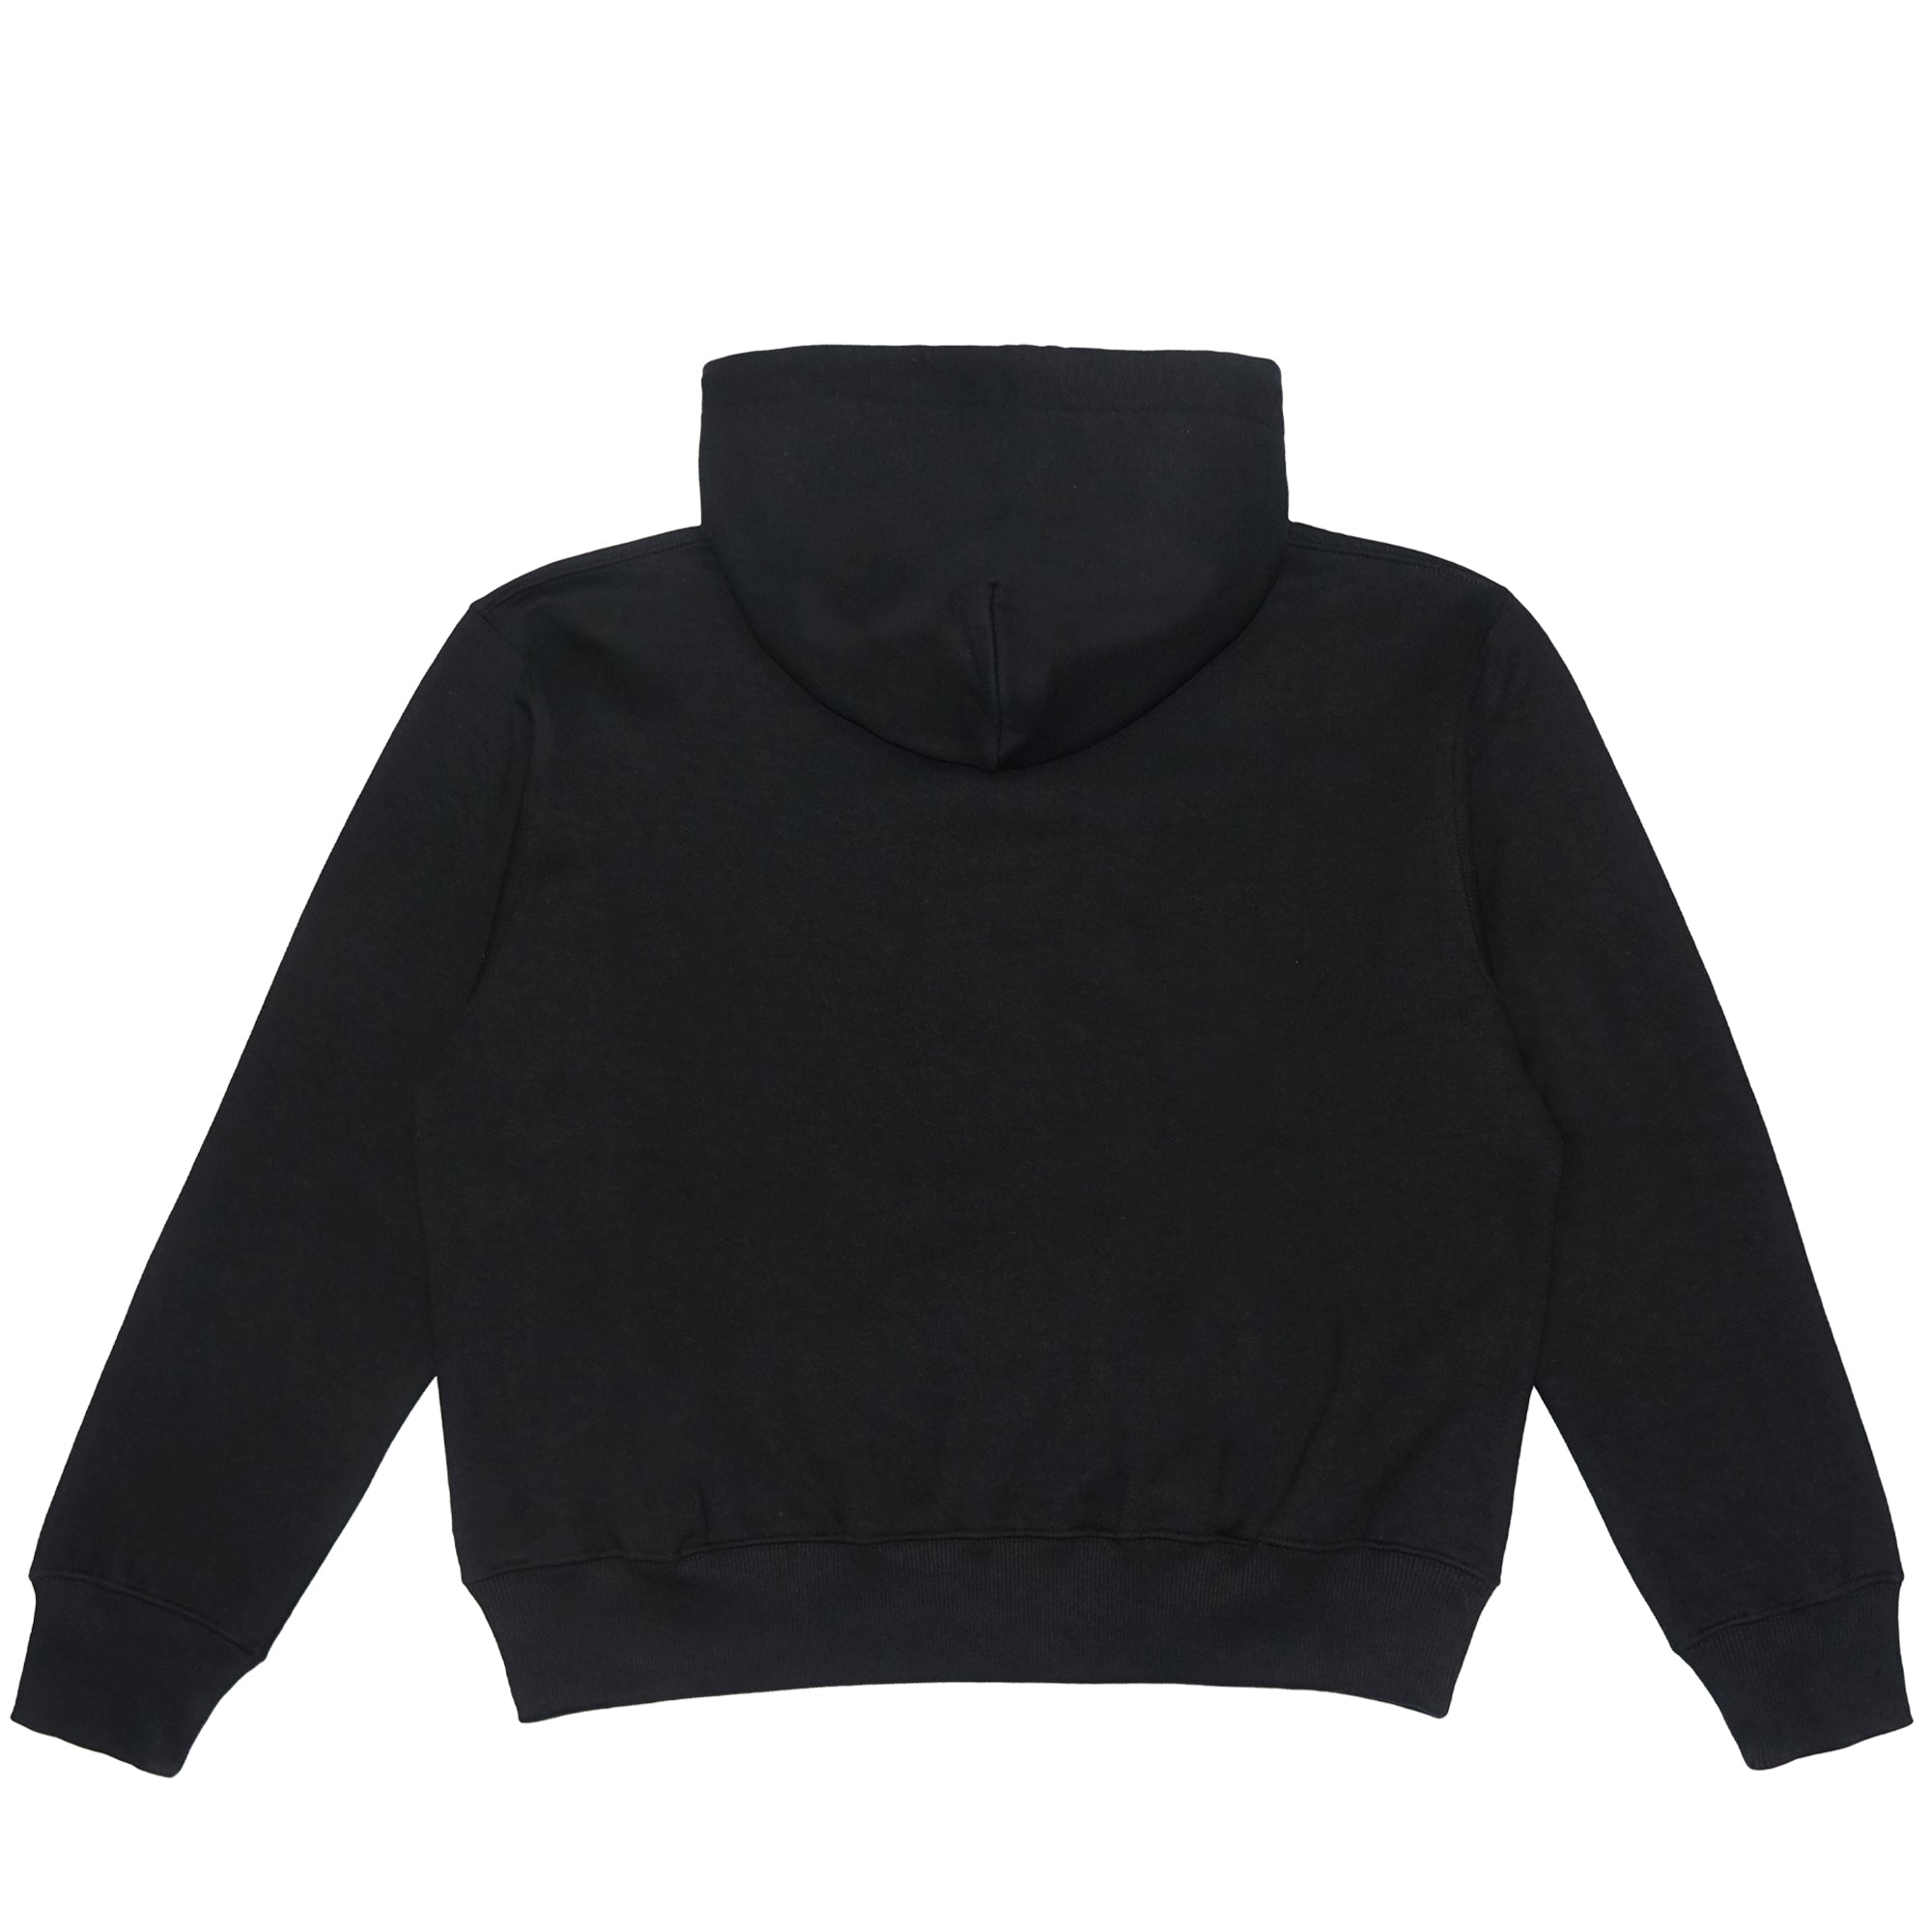 The Salvages AW22 Voyager N.4 Boxy Hoodie in Black